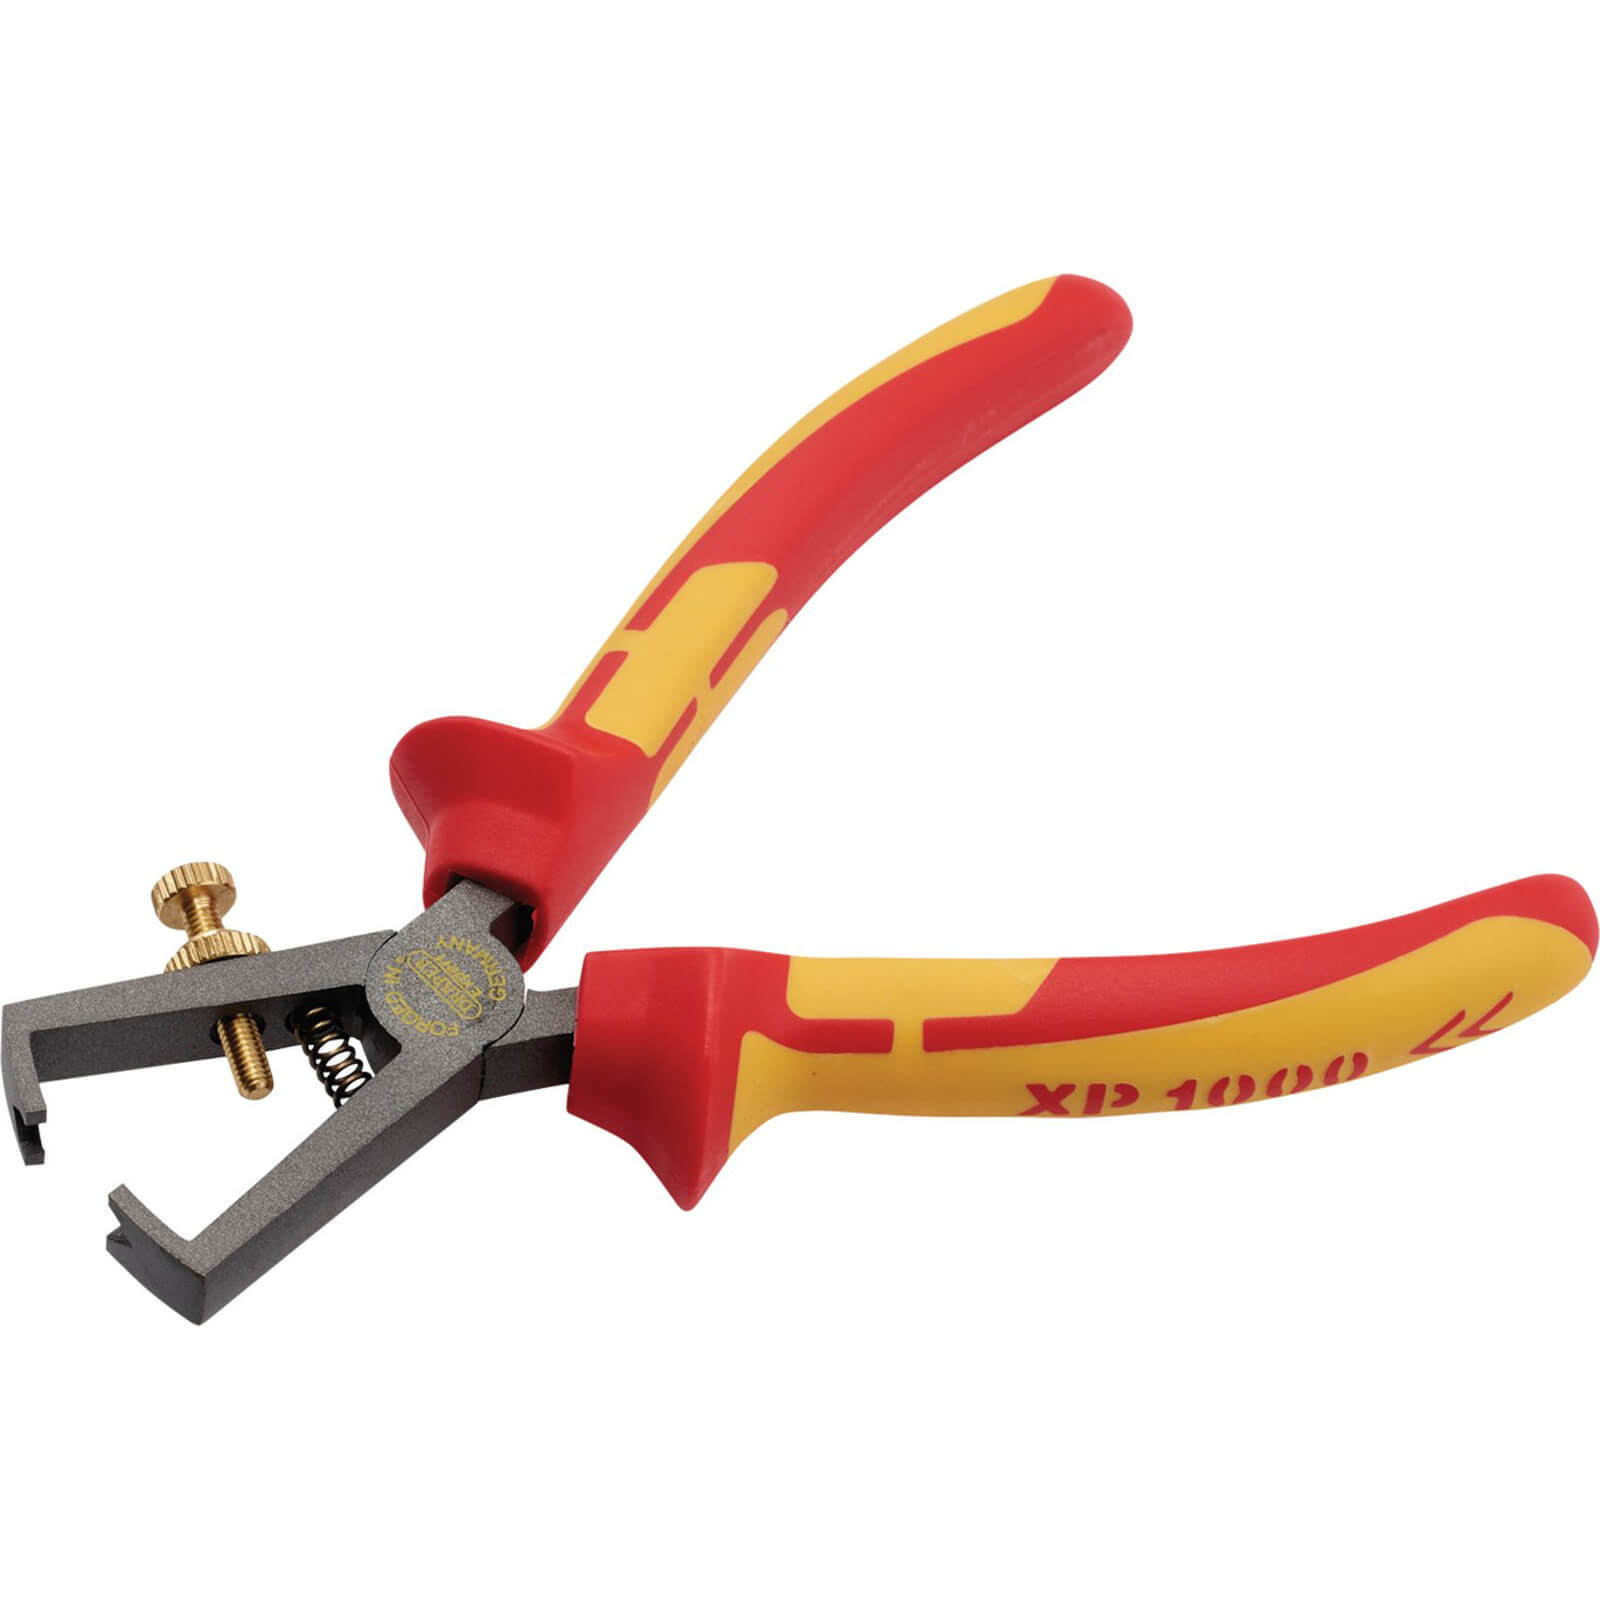 Photo of Draper Xp1000 Vde Insulated Wire Strippers 160mm